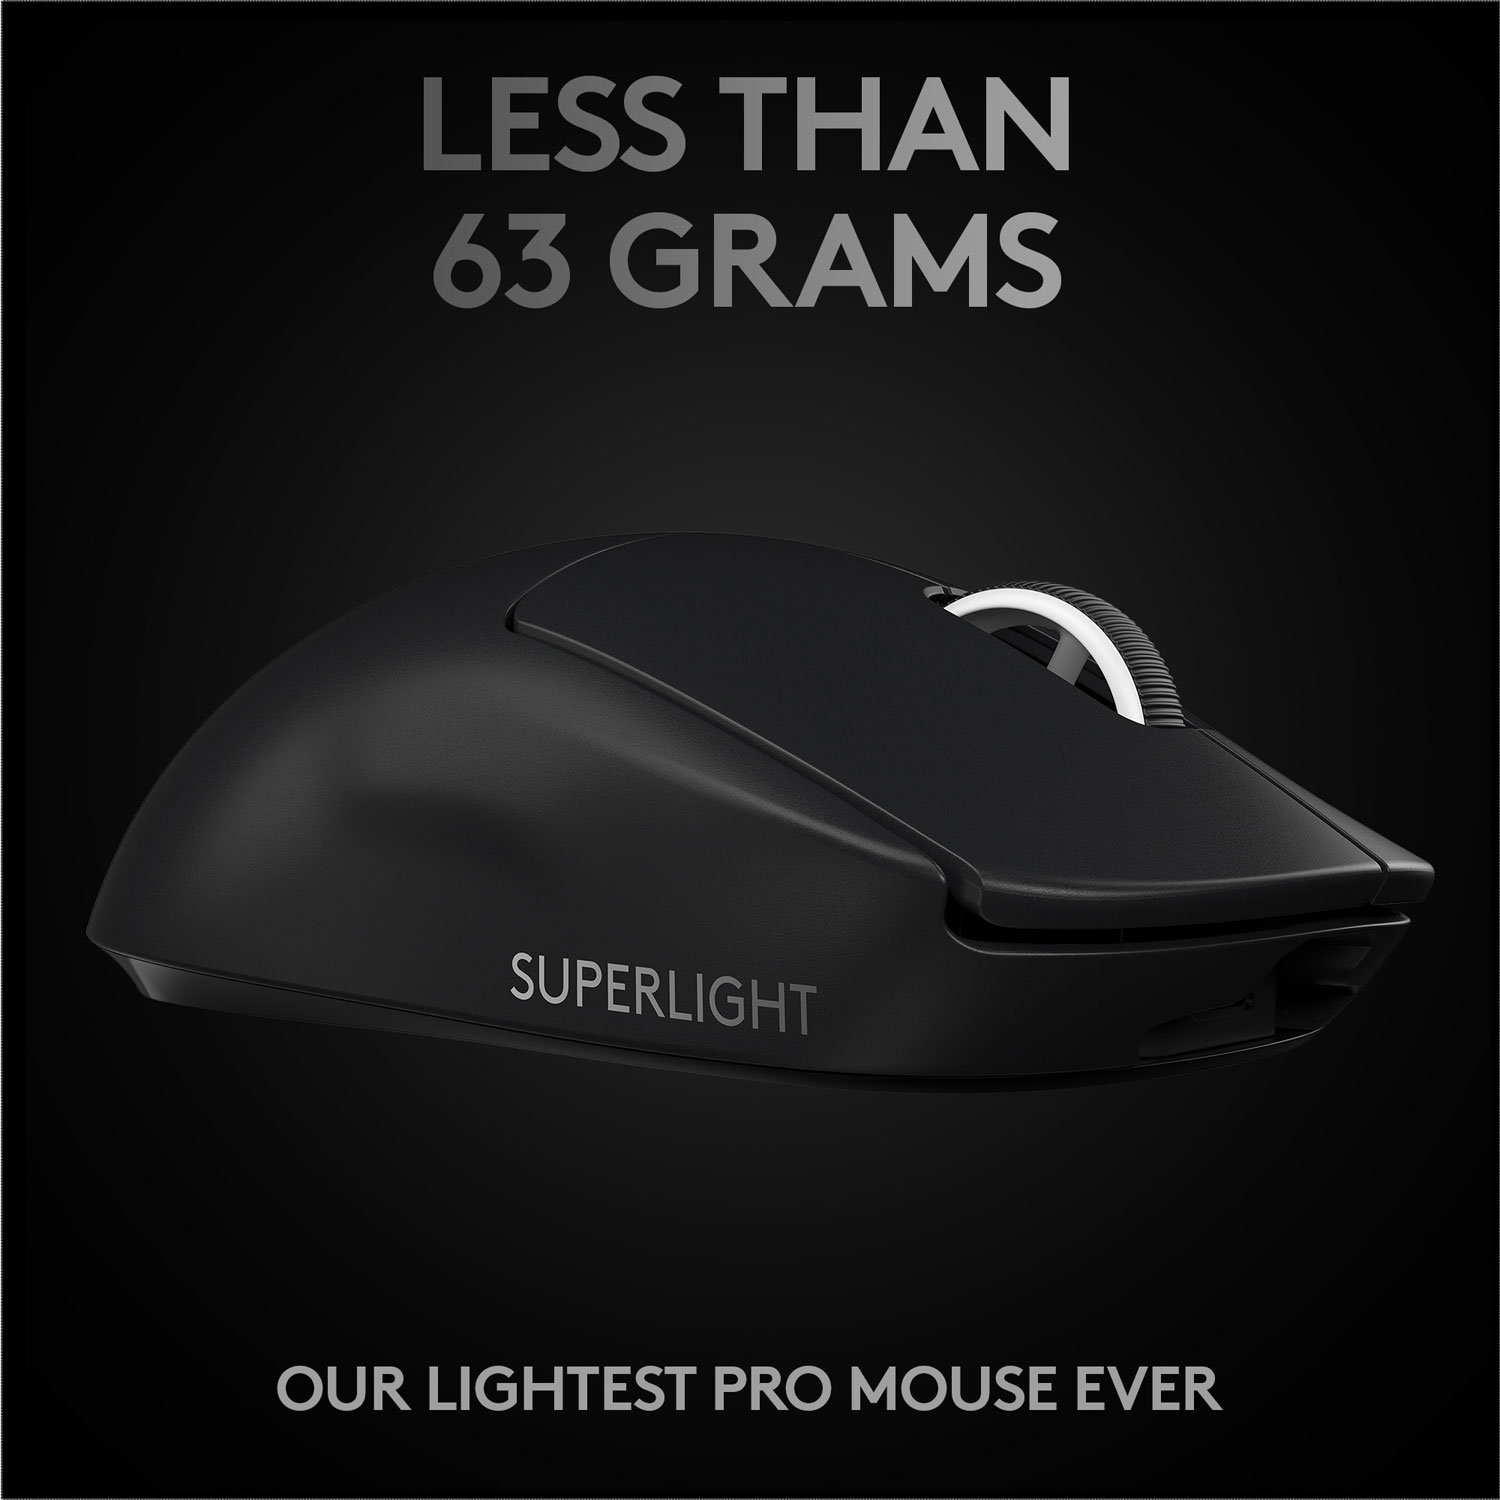 Logitech G PRO Lightweight Wireless Optical Ambidextrous Gaming Mouse with  RGB Lighting Black 910-005270 - Best Buy